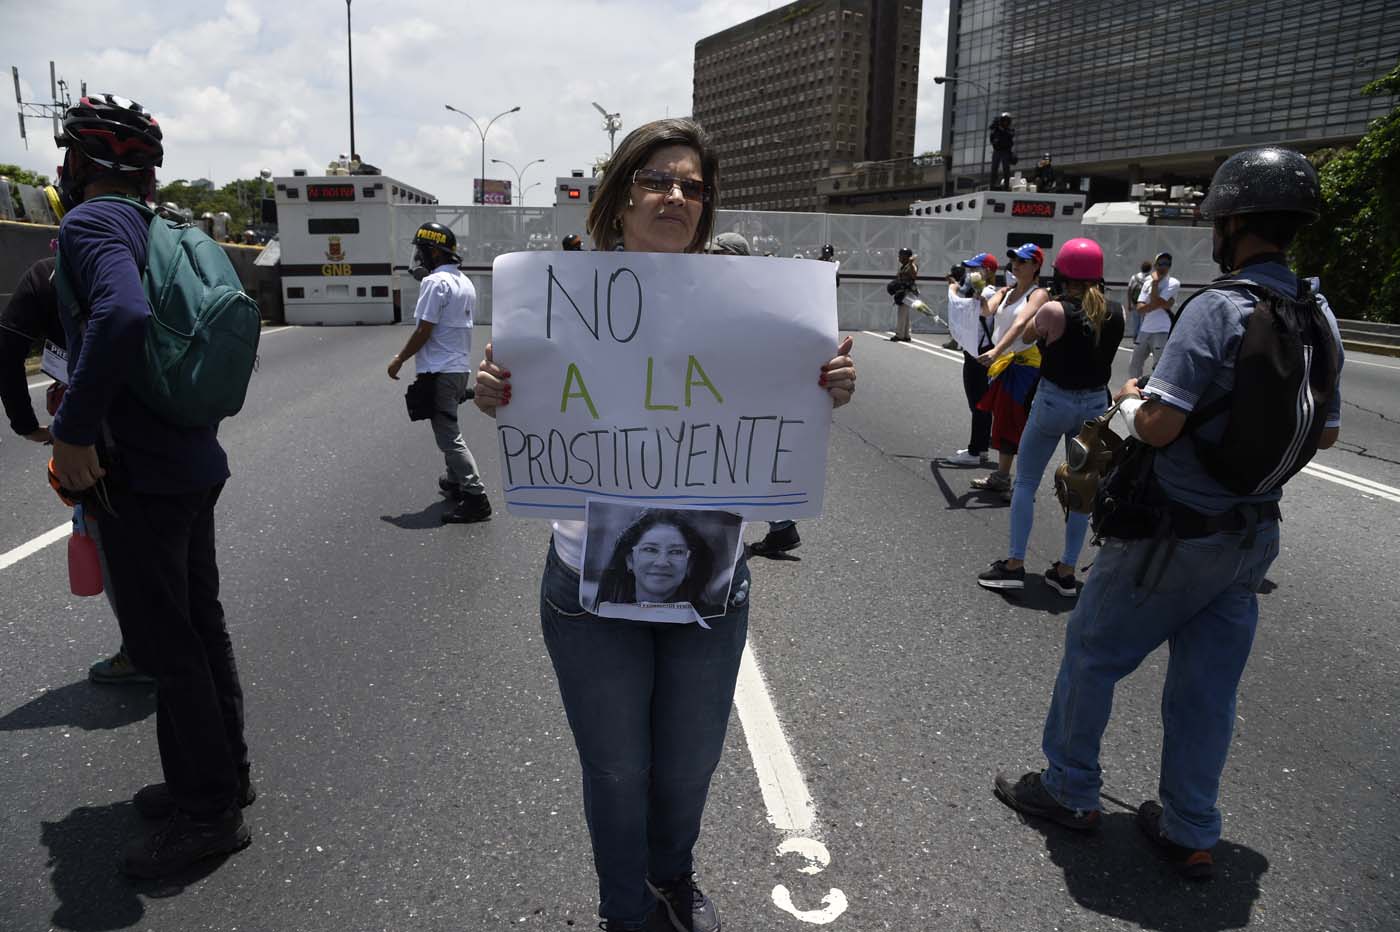 A Venezuelan opposition activist holds a sign against Venezuelan First Lady Cilia Flores during a women's march aimed to keep pressure on President Nicolas Maduro, whose authority is being increasingly challenged by protests and deadly unrest, in Caracas on May 6, 2017. The death toll since April, when the protests intensified after Maduro's administration and the courts stepped up efforts to undermine the opposition, is at least 36 according to prosecutors. / AFP PHOTO / JUAN BARRETO